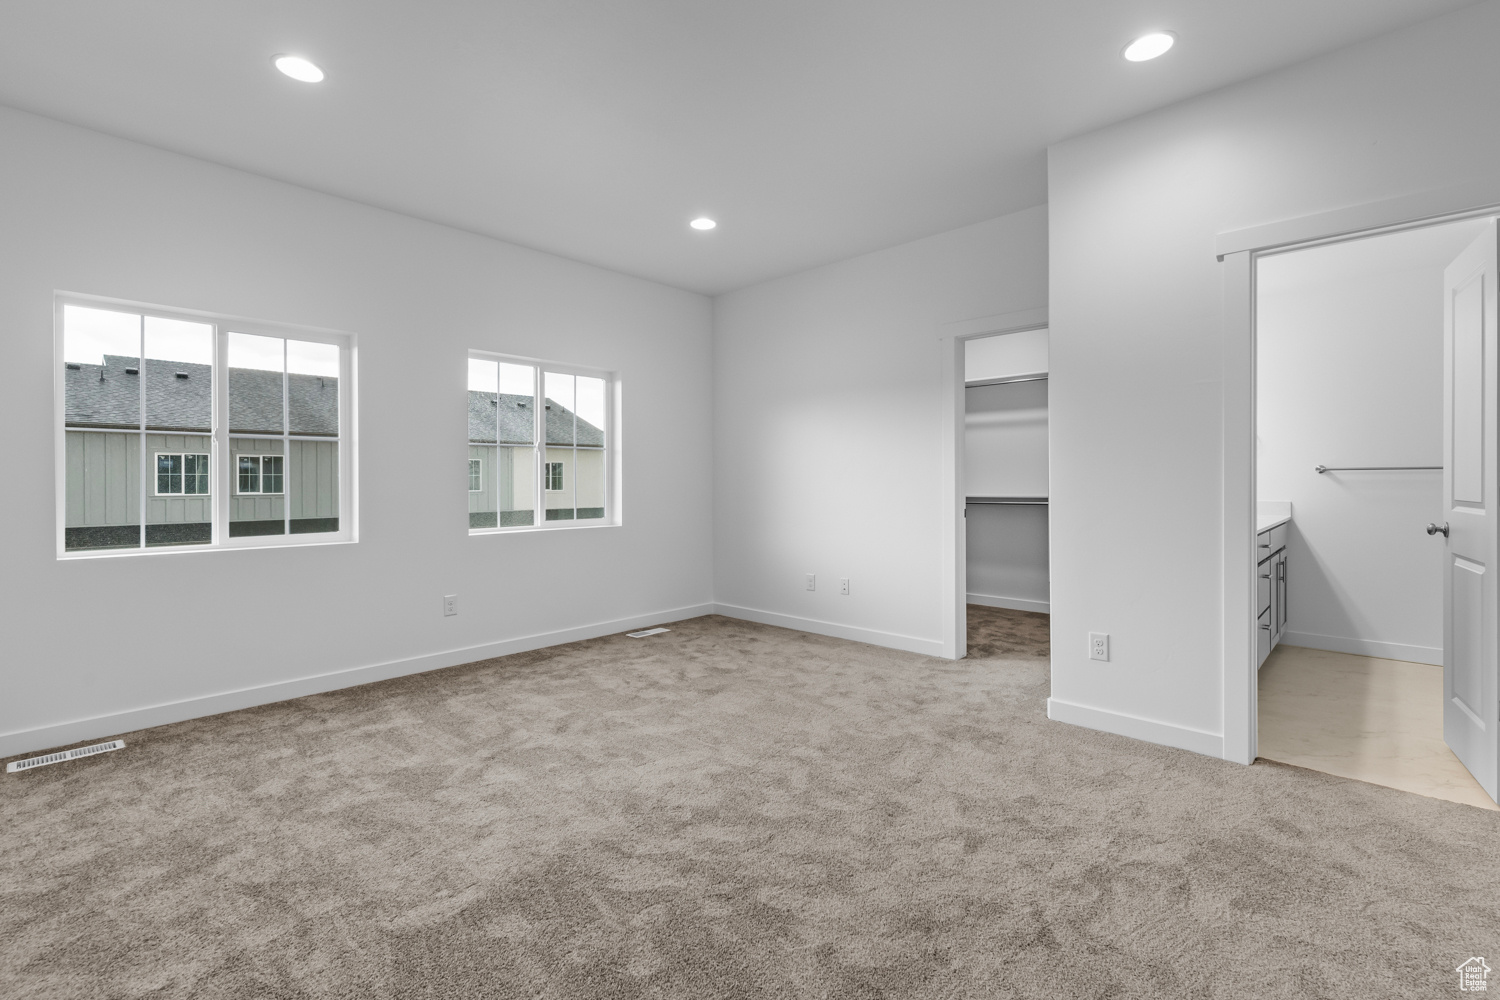 Unfurnished bedroom with light colored carpet, ensuite bath, a walk in closet, and a closet